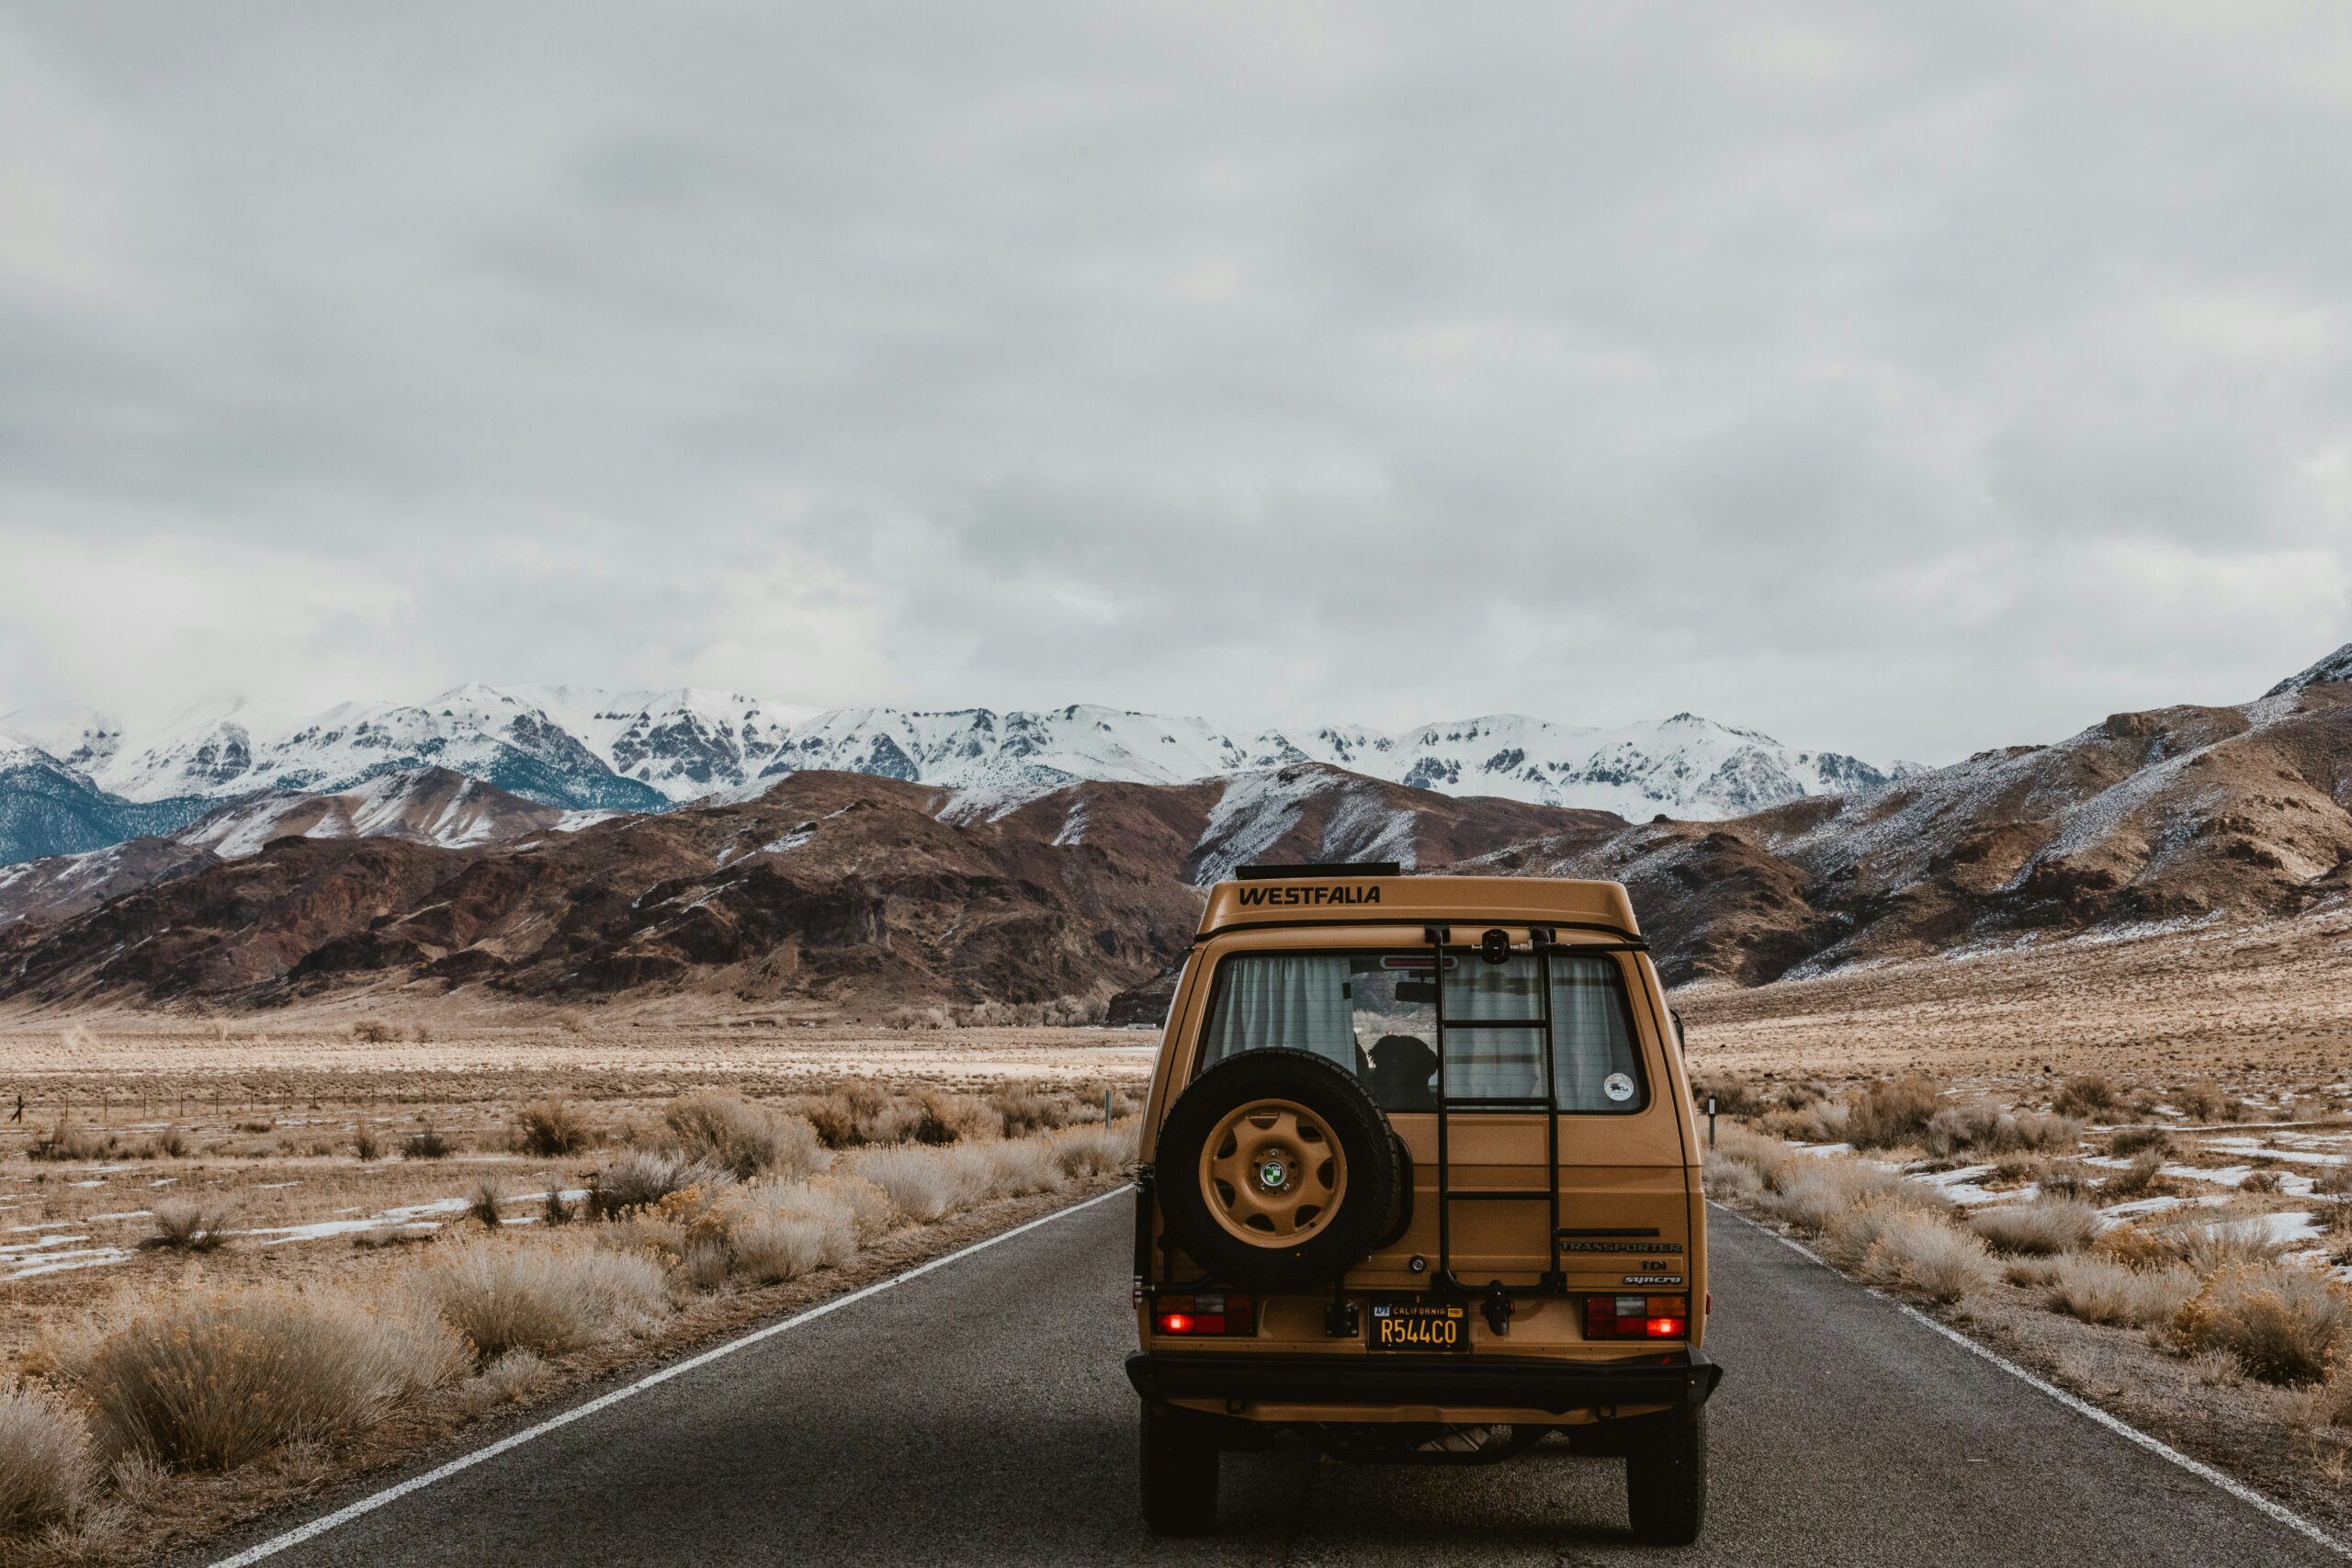 These traditional games are great ways to pass the time on extended road trips. 
pictured: A family sized van driving along a one-way road near snowy mountains 